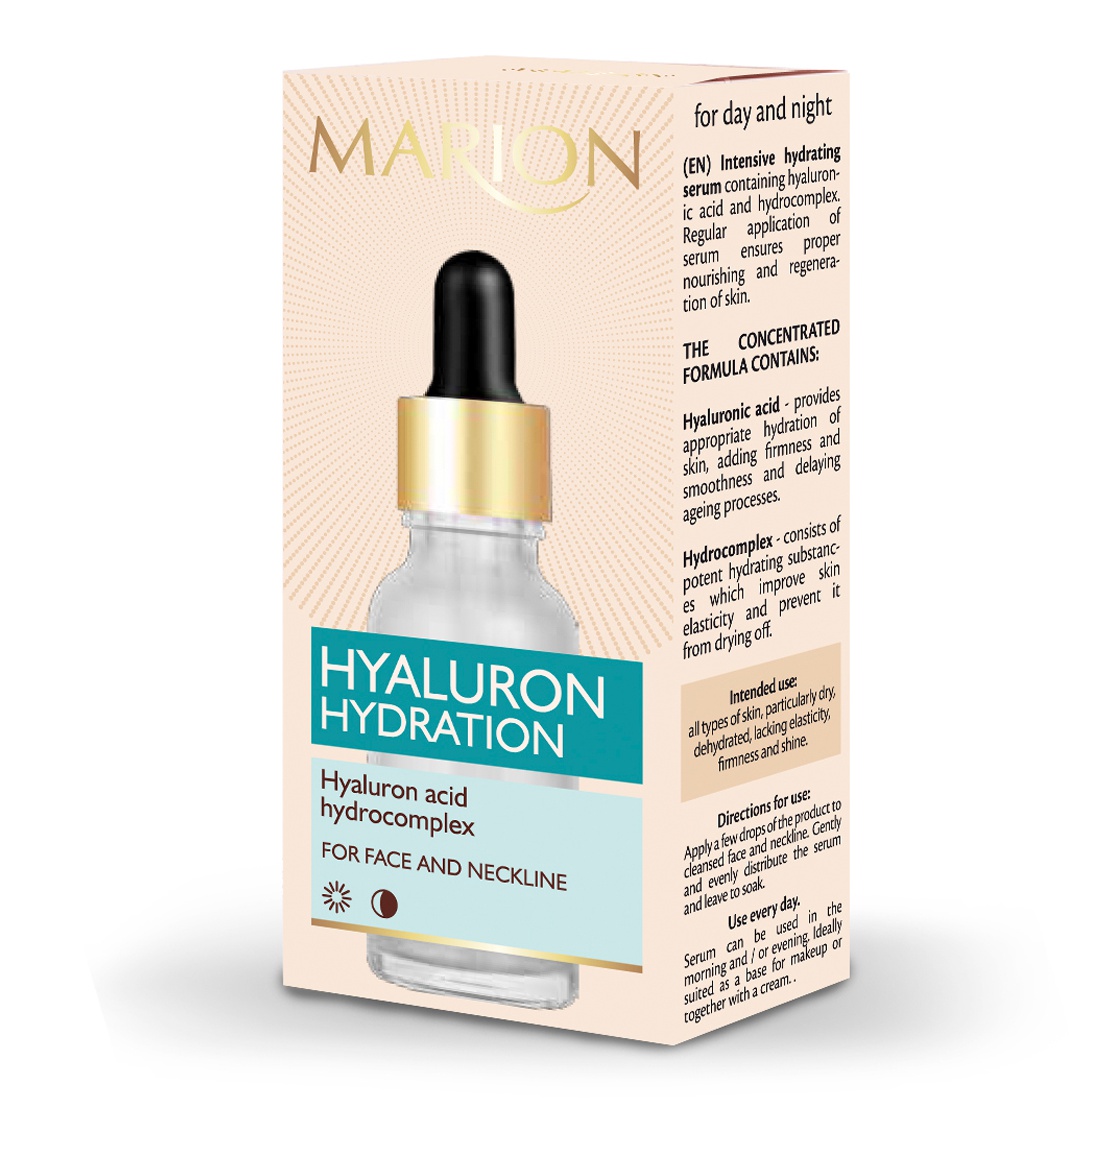 marion Hyaluron Hydration